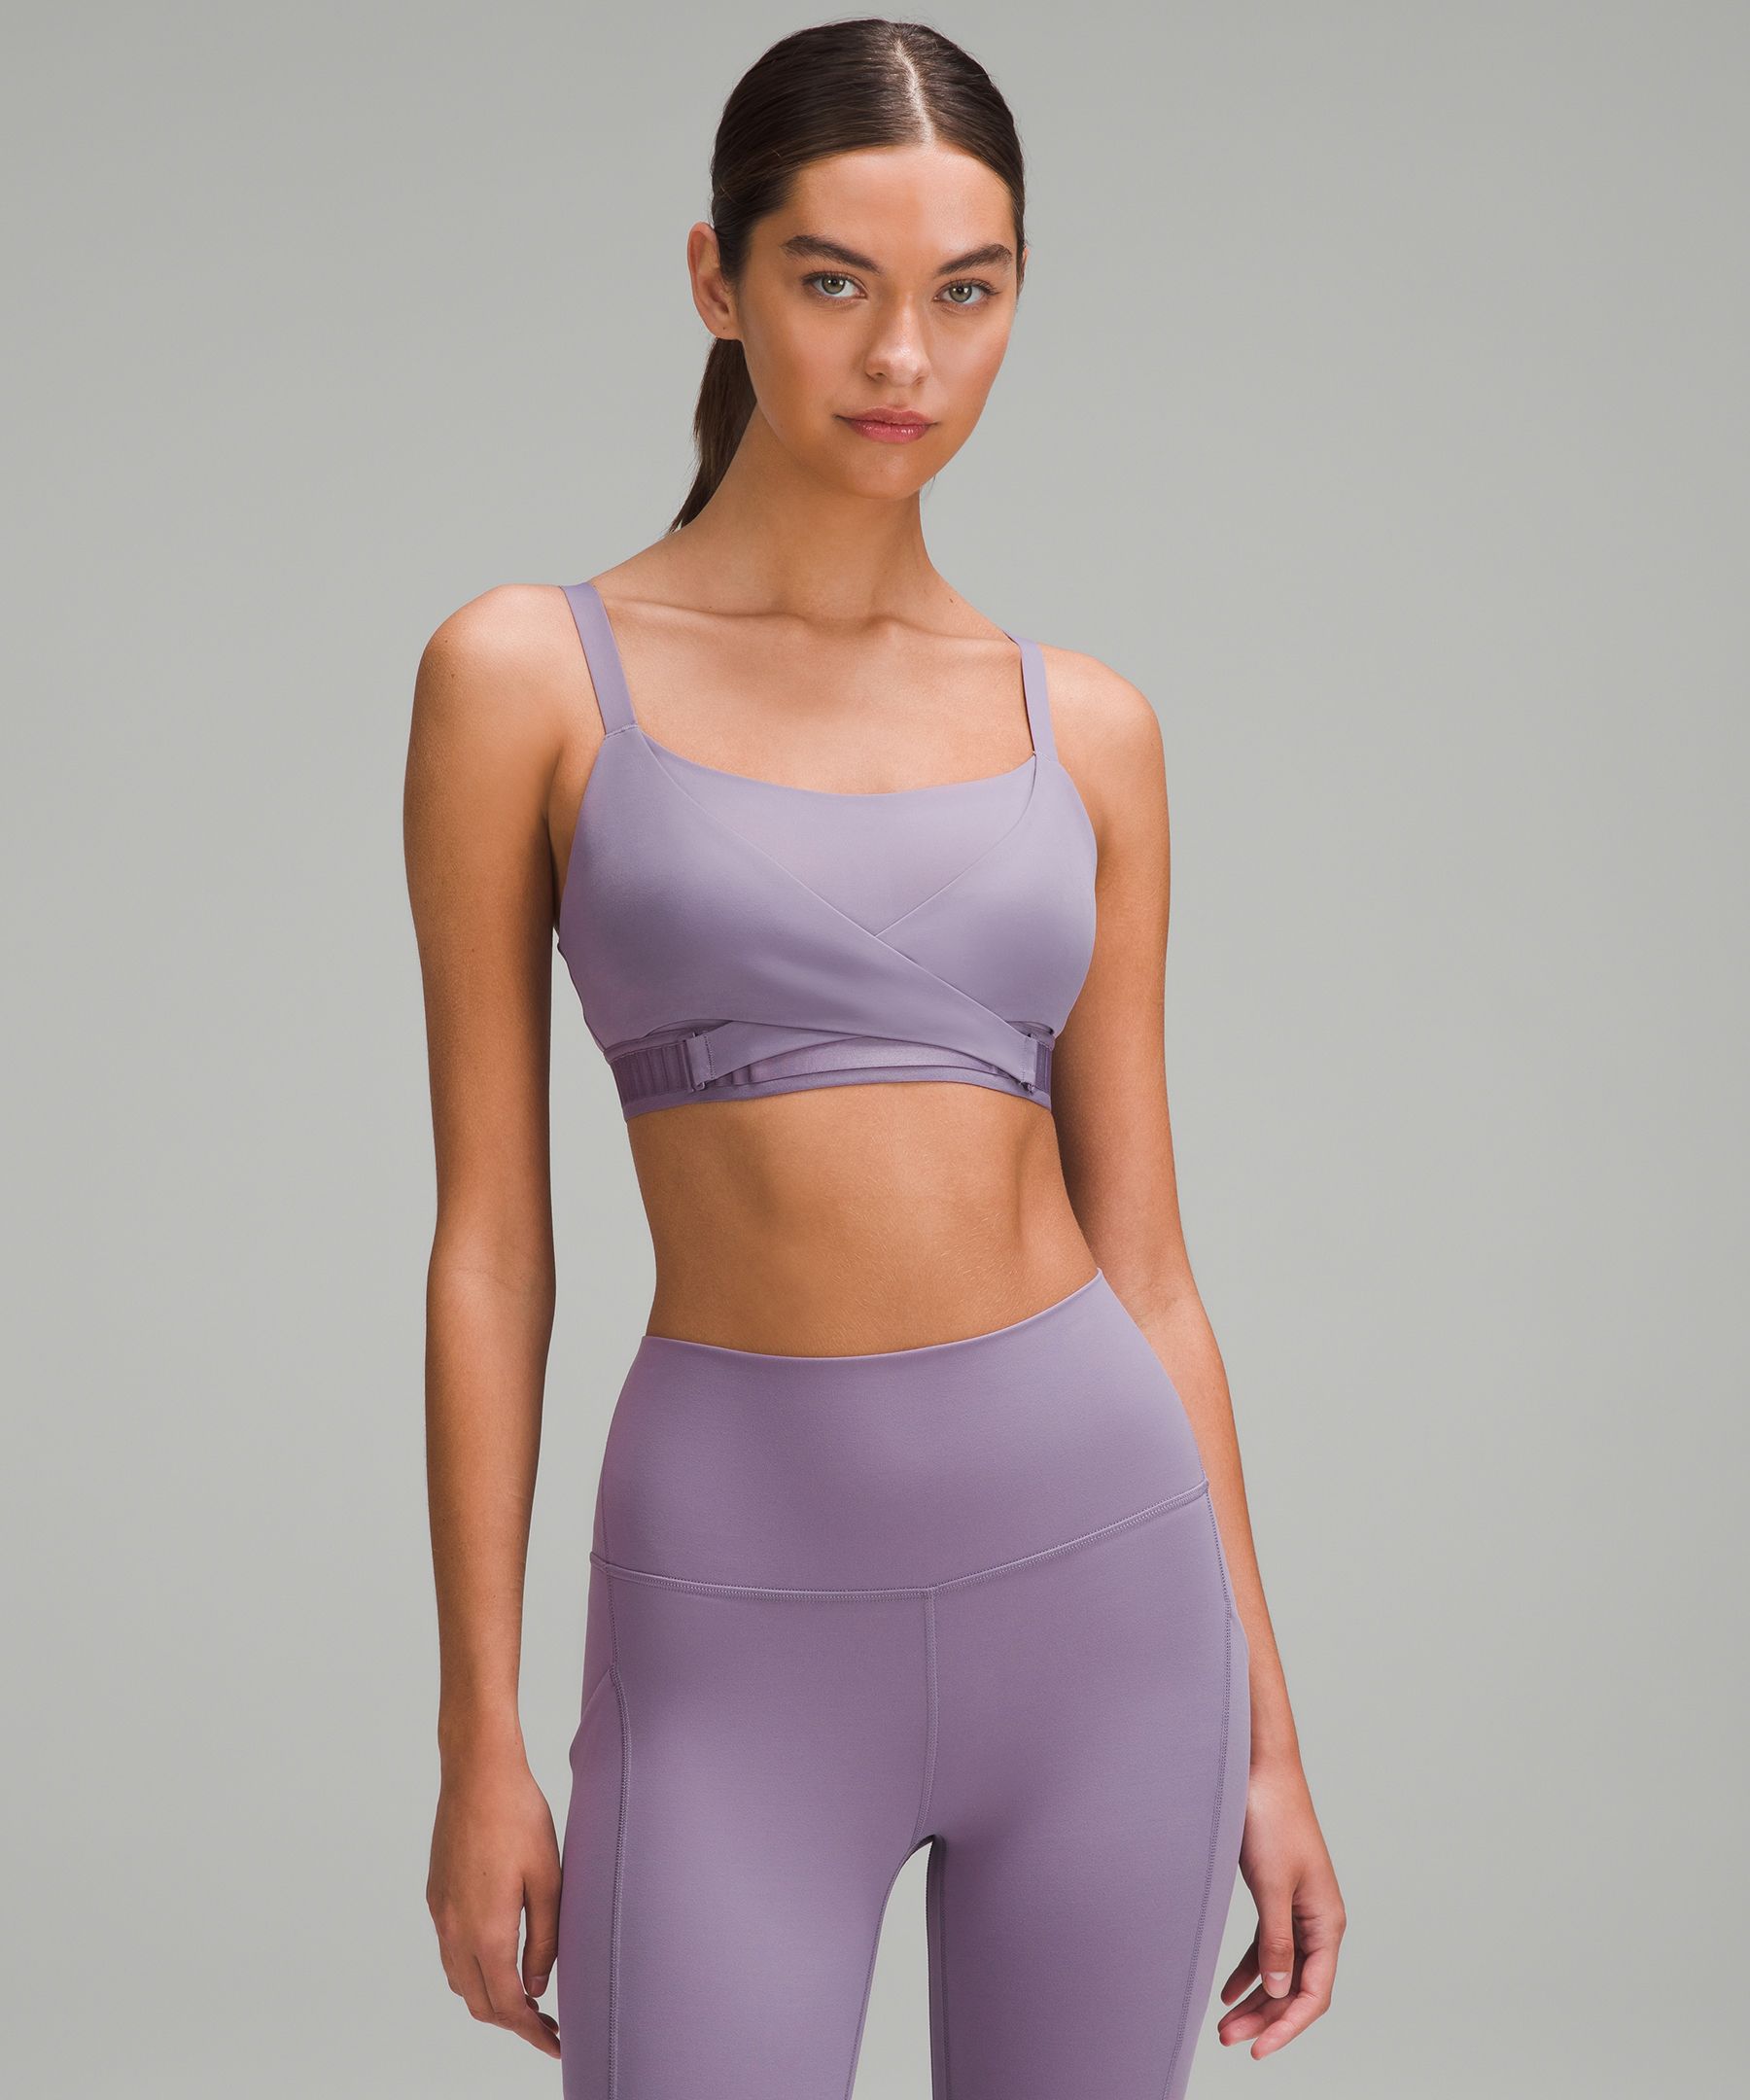 Bloom - Designer Finds - Lululemon Black Purple Sports Bra size 8 $32  Lululemon Shorts size 6 $35 Nike White Sneakers size 10 $32 If you would  like to purchase an item